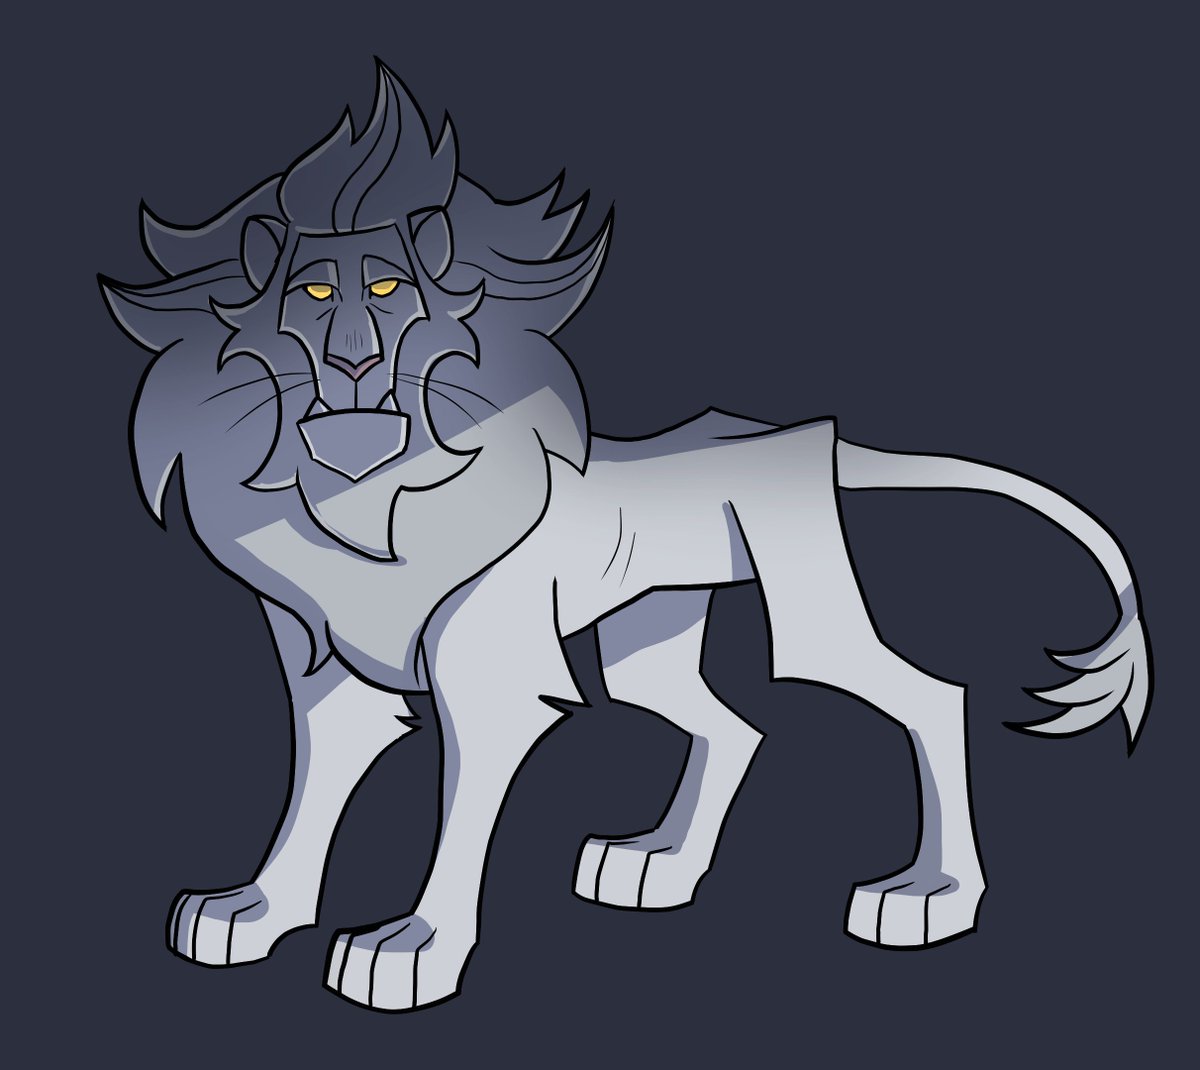 Leandro's lion form. He is literally a big scary cat. 